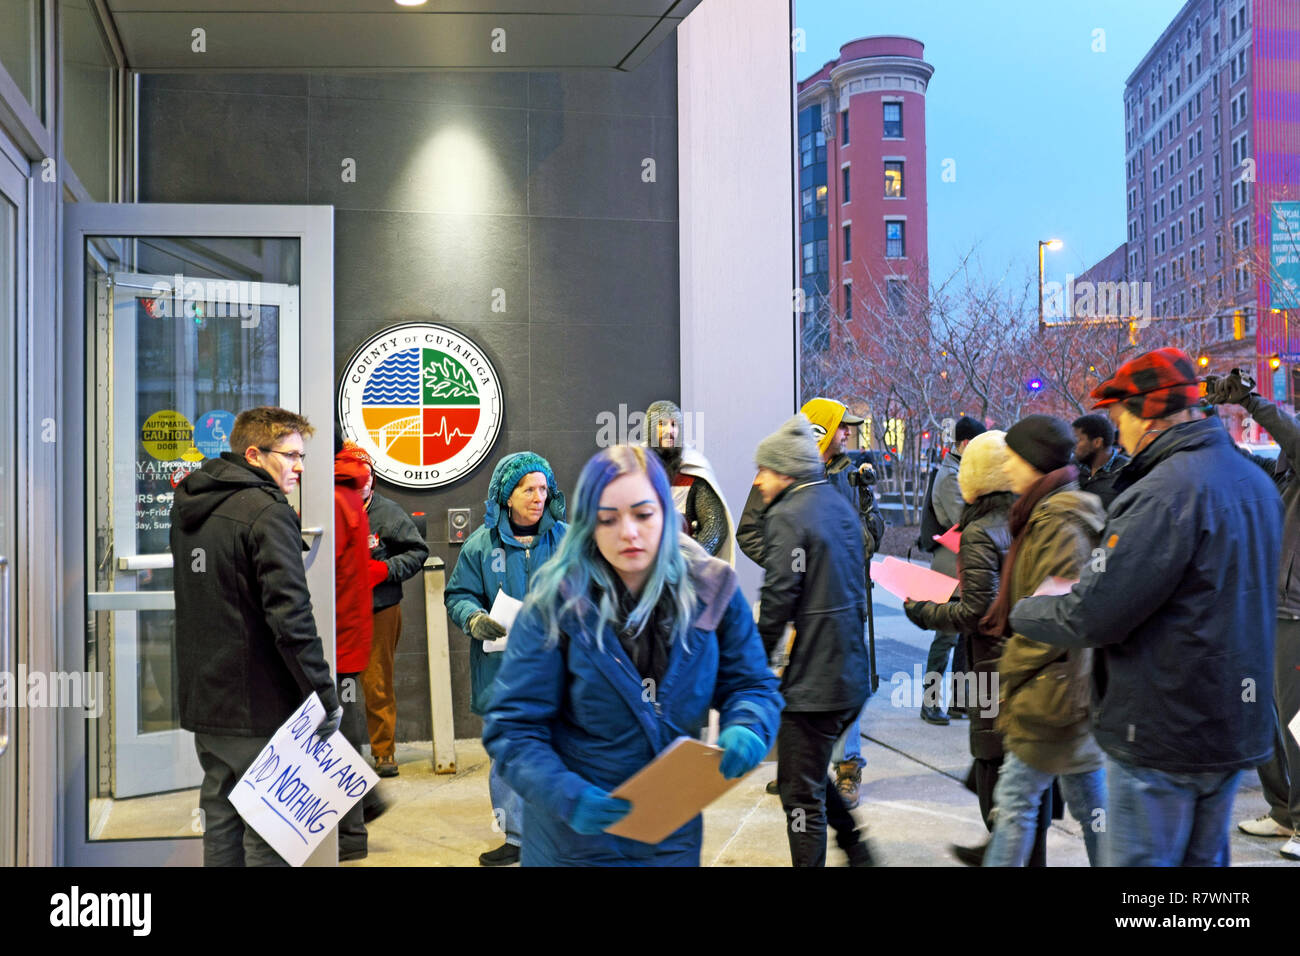 Cleveland, Ohio, USA, 11th Dec, 2018.  Protesters enter the Cuyahoga County Administration building to attend the Cuyahoga County Council meeting during which the reported 'inhumane' conditions of the jails will be addressed.  U.S. Marshals have called the county jails to be among the worst in the country citing overcrowding, underadministered healthcare, safety, access to toilets, and the withholding of food and water amongst the offenses reported.  The U.S Marshalls were summoned to conduct a review after deaths of 7 inmates occurred.  . Credit: Mark Kanning/Alamy Live News Stock Photo